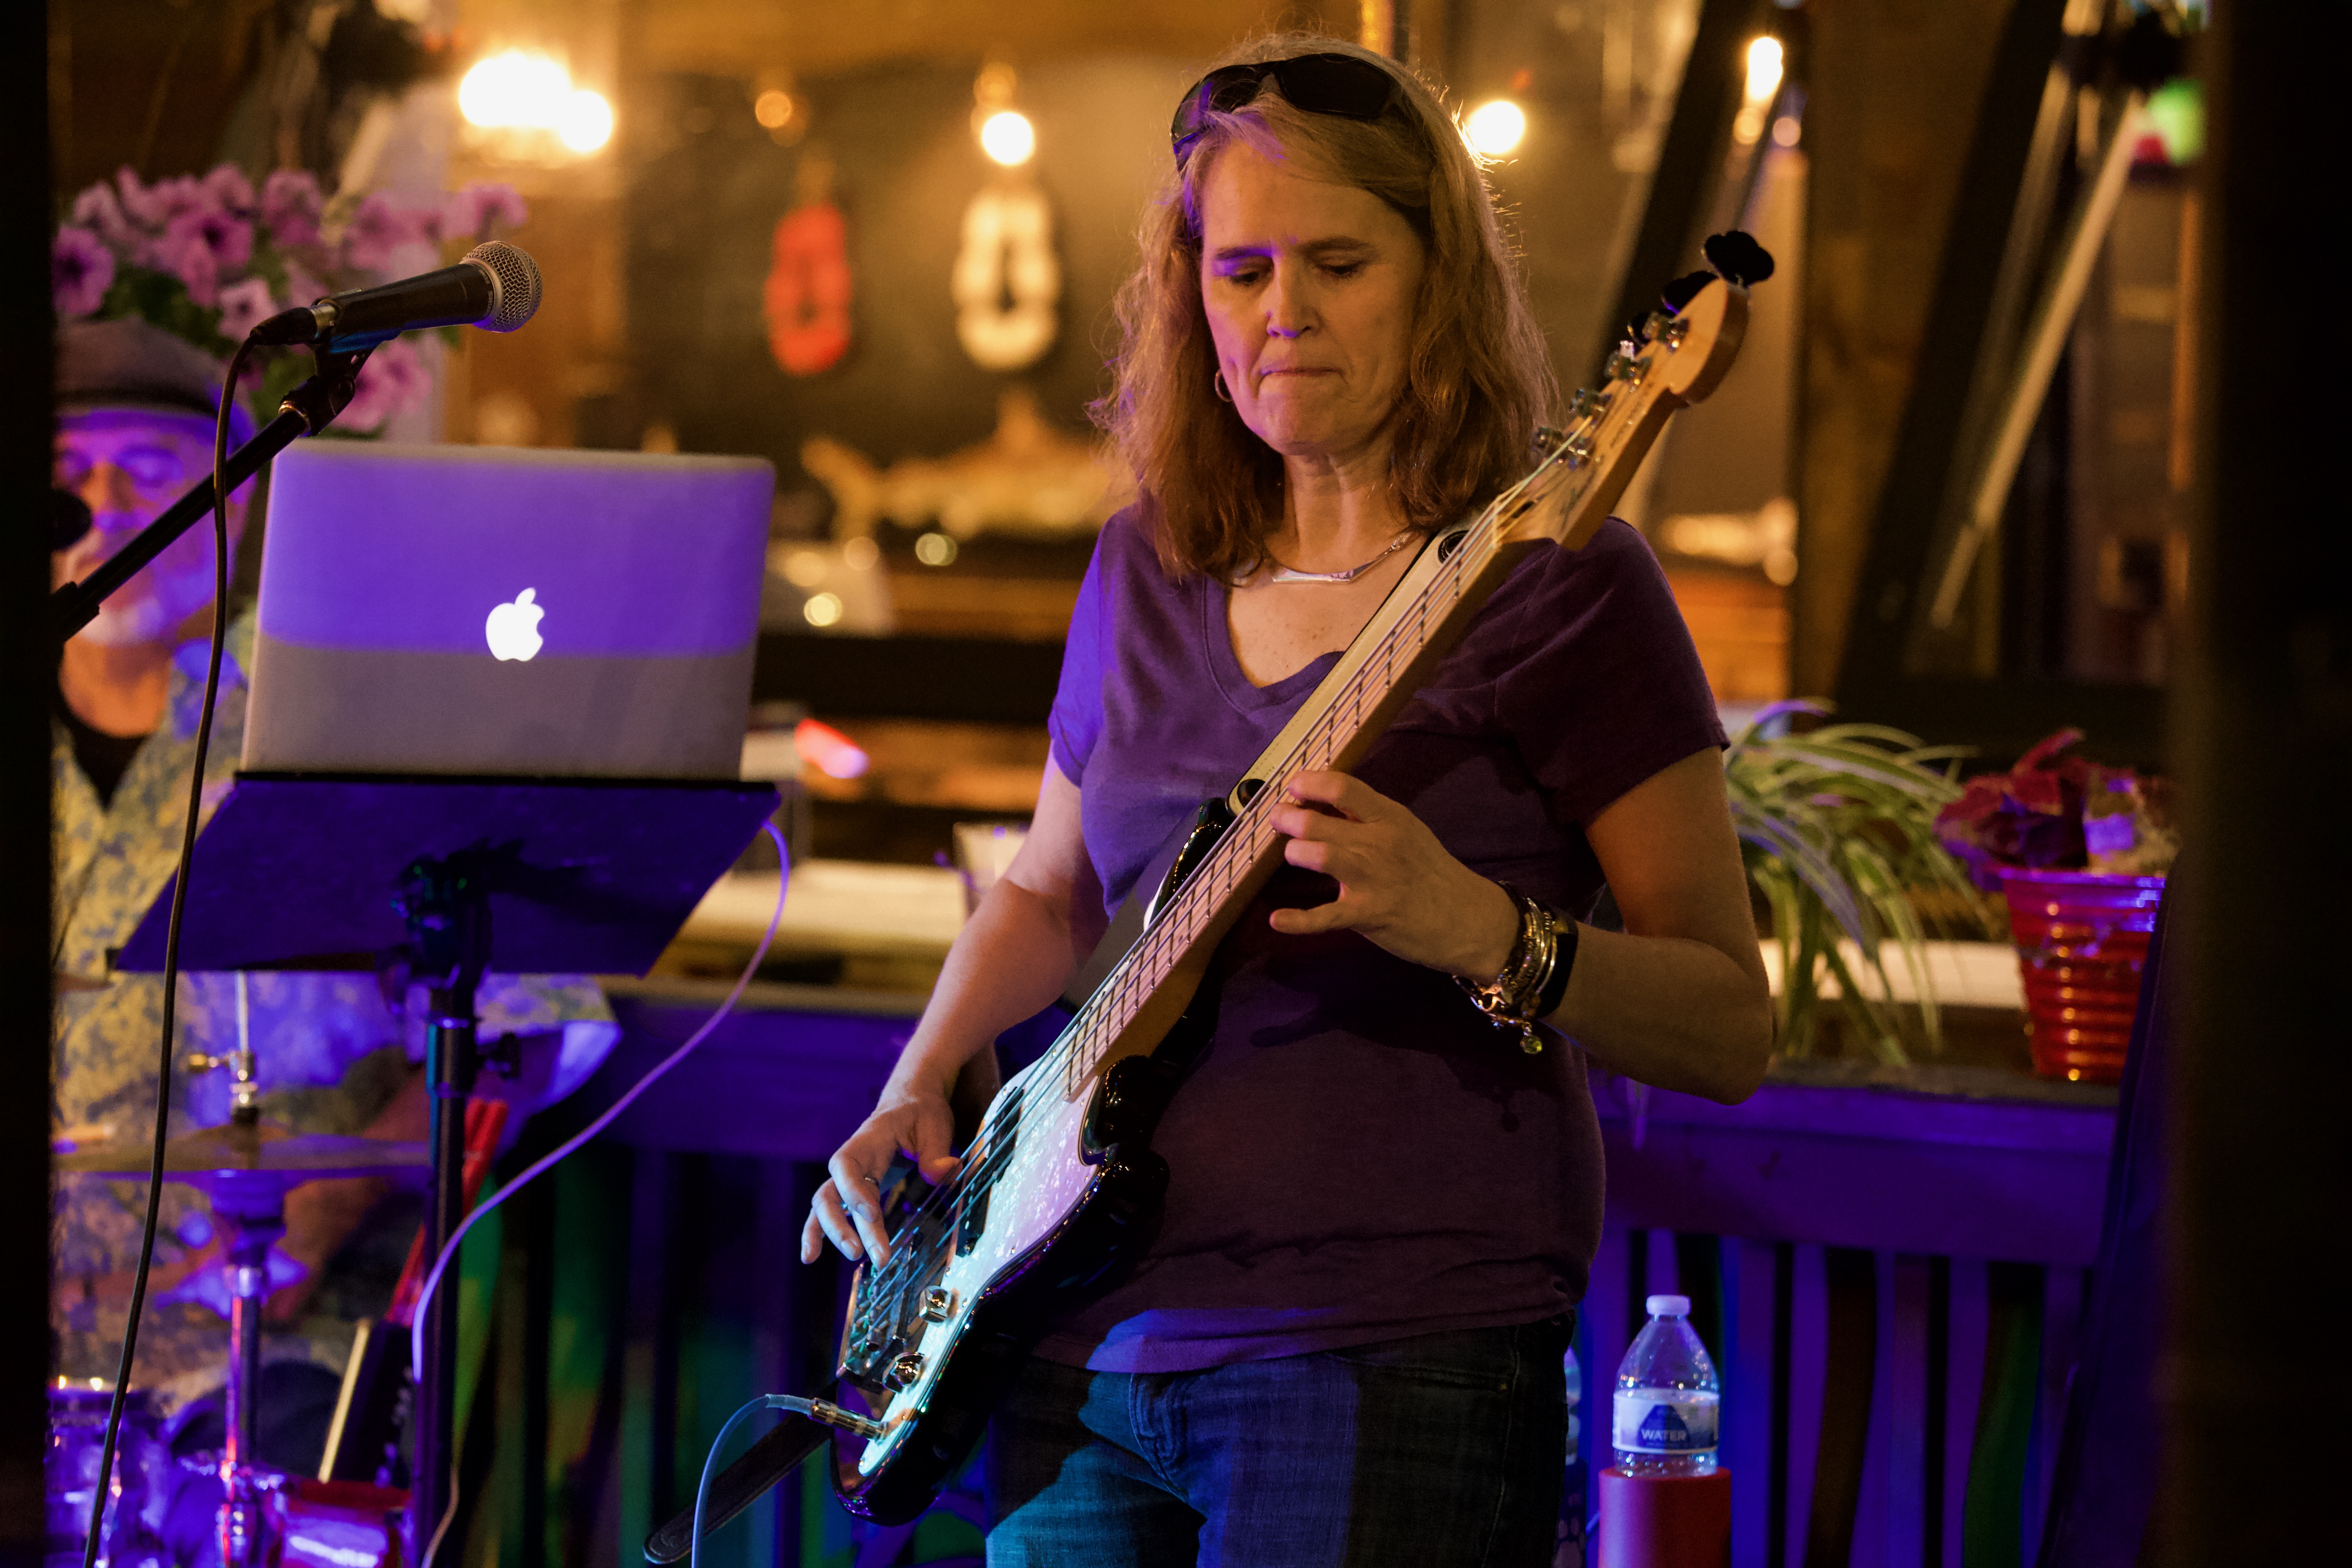 Dianne DaLee, bass player for Chequered Blue